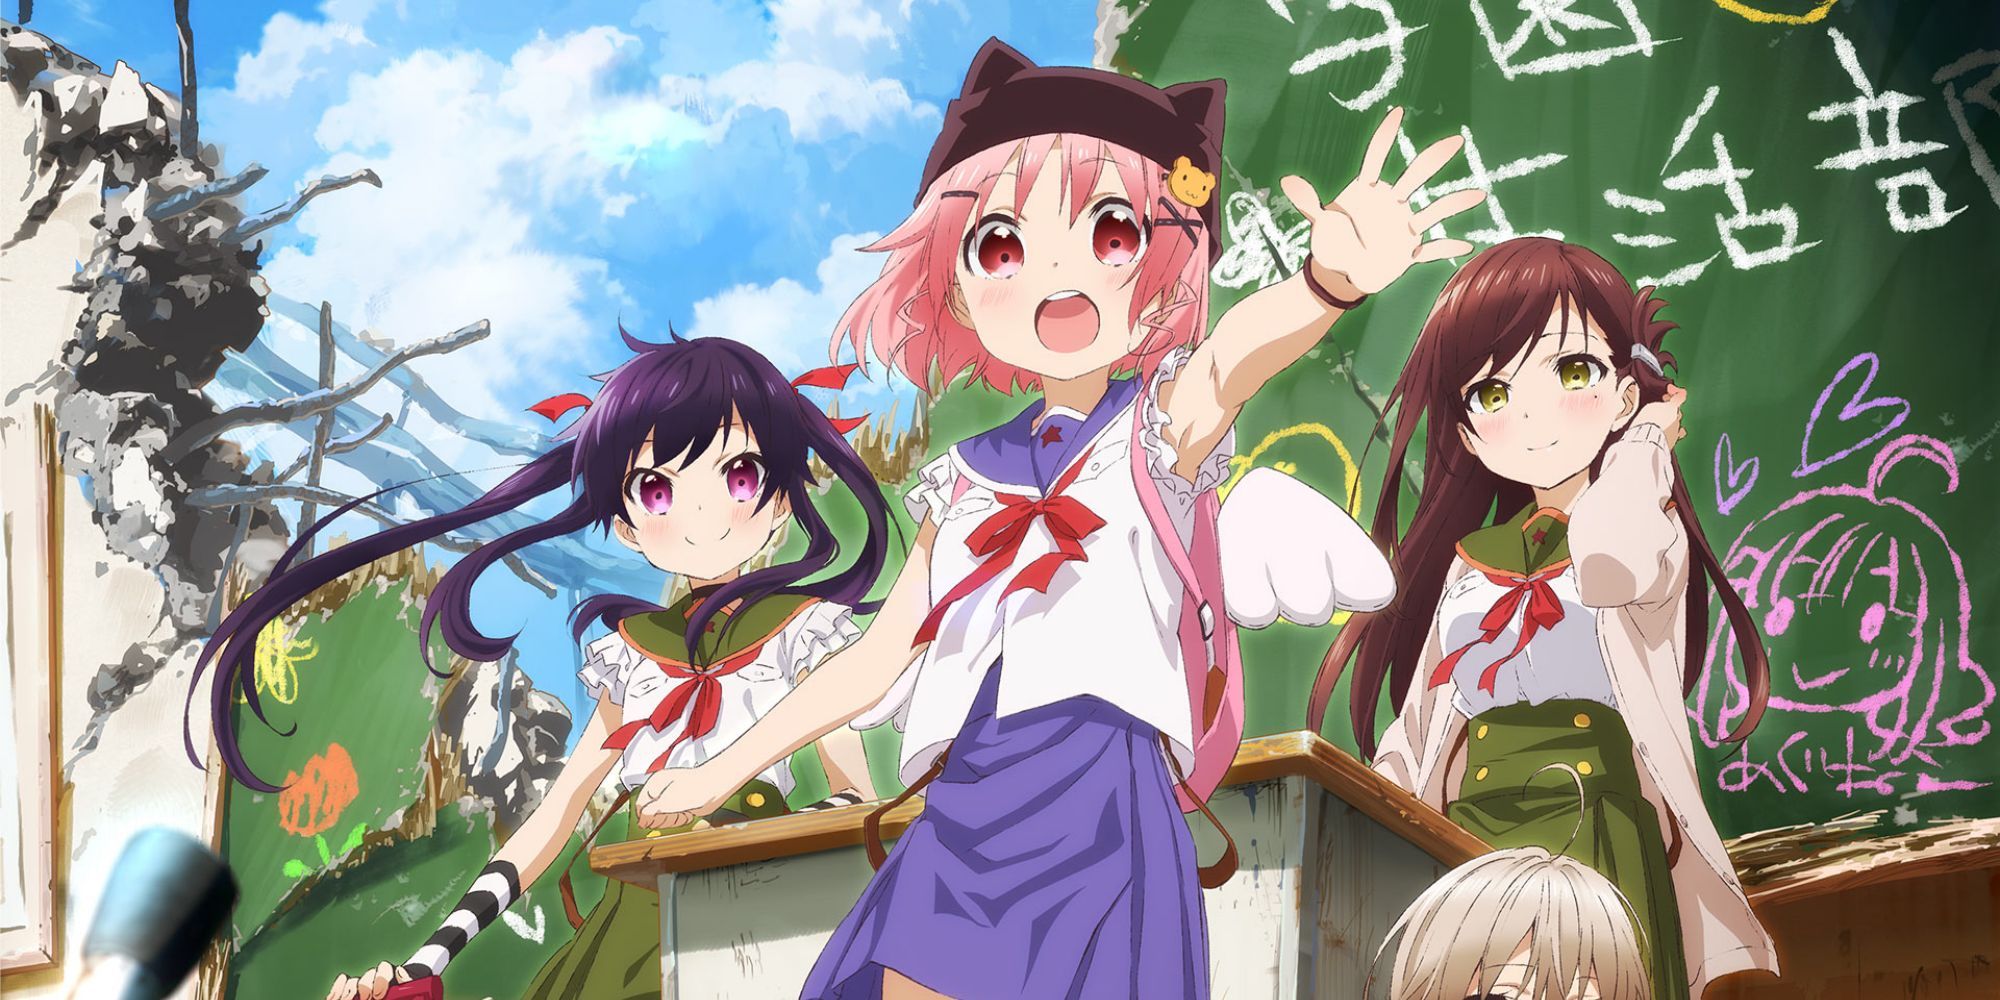 Three characters from Gakkou Gurashi standing in a destroyed classroom